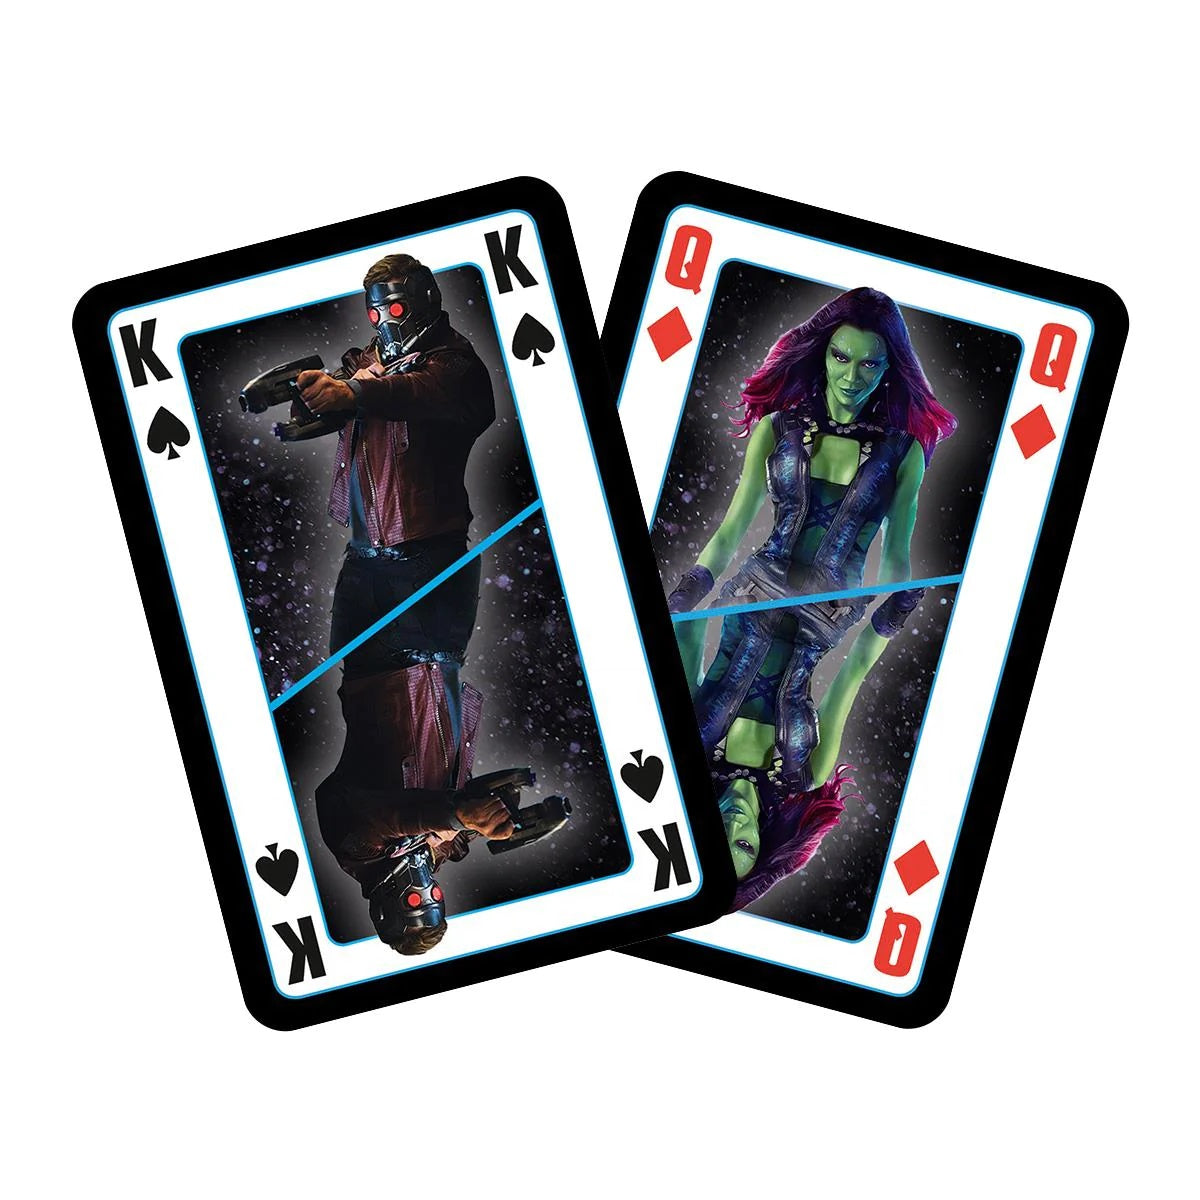 MARVEL : GUARDIANS OF THE GALAXY - Waddingtons Playing Cards